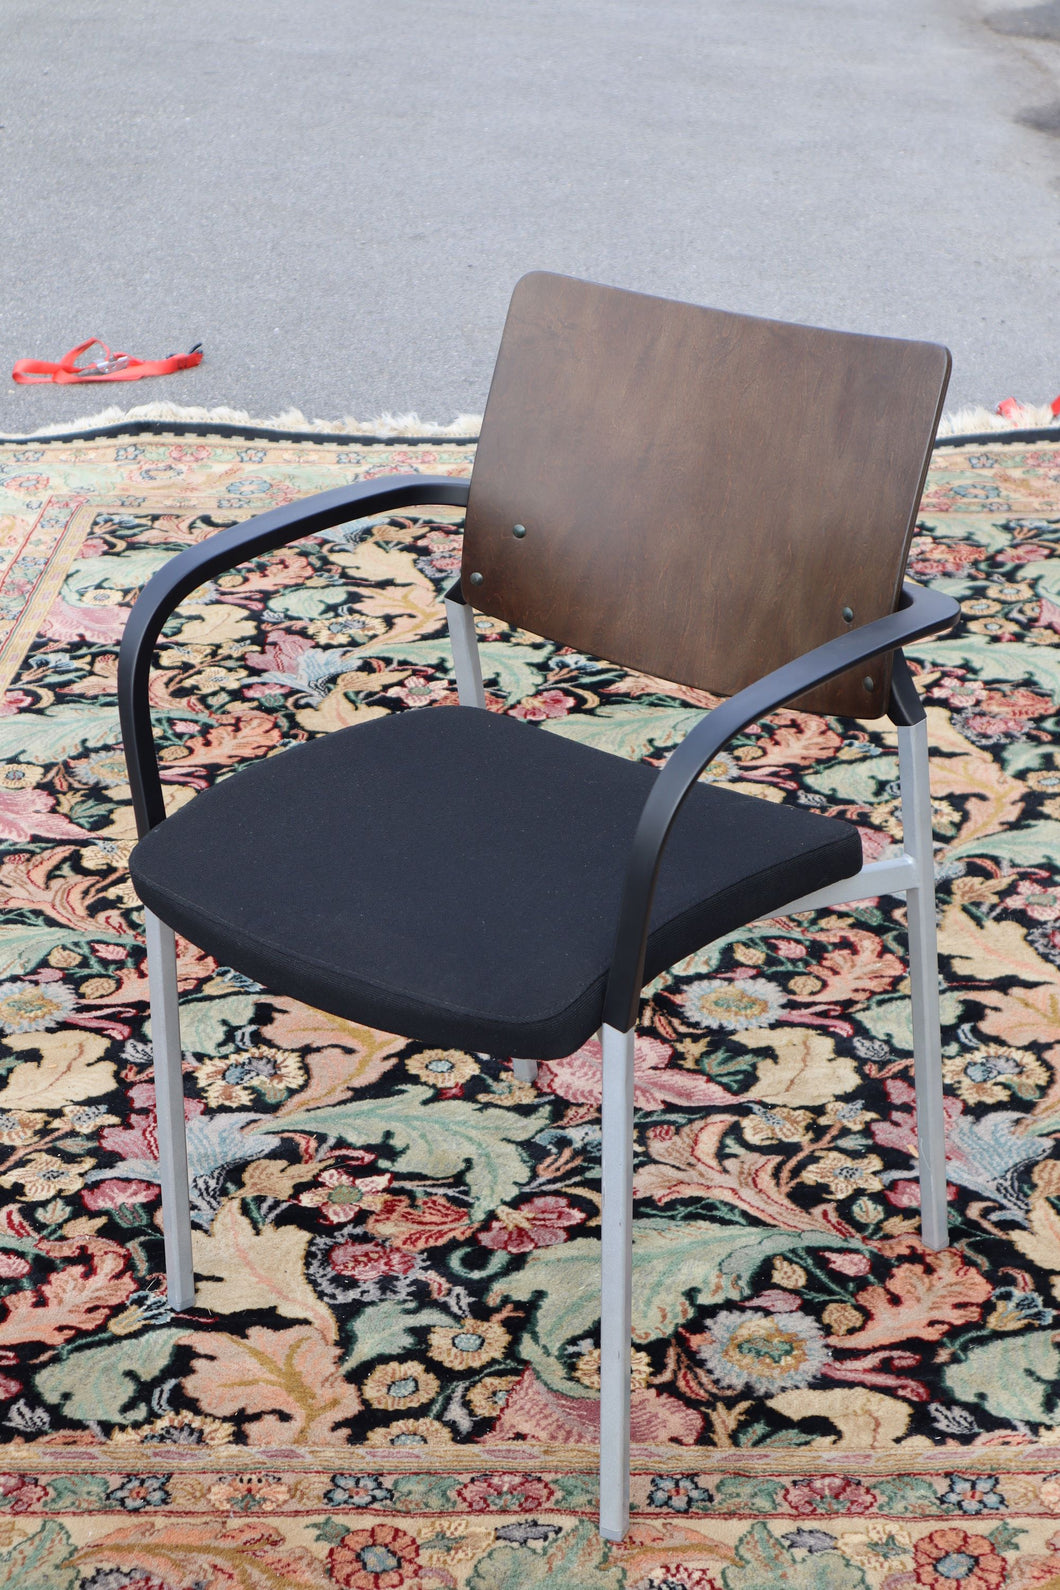 Font Arm Chair by Source Black Upholstery- Retails New for $635